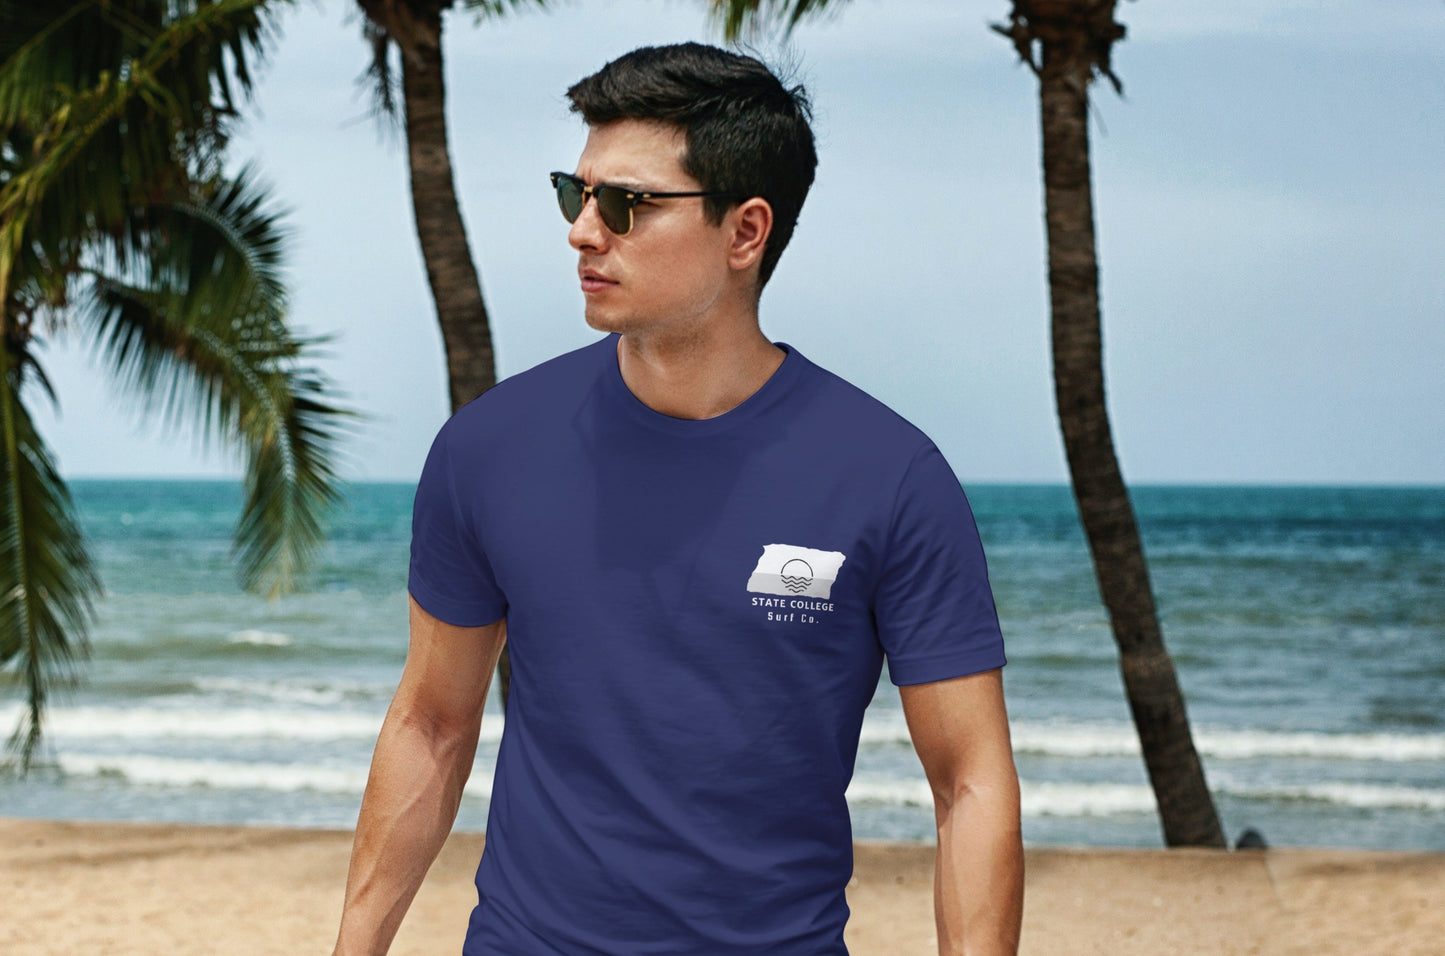 State College Surf Co. Blue Surfboard Shirt